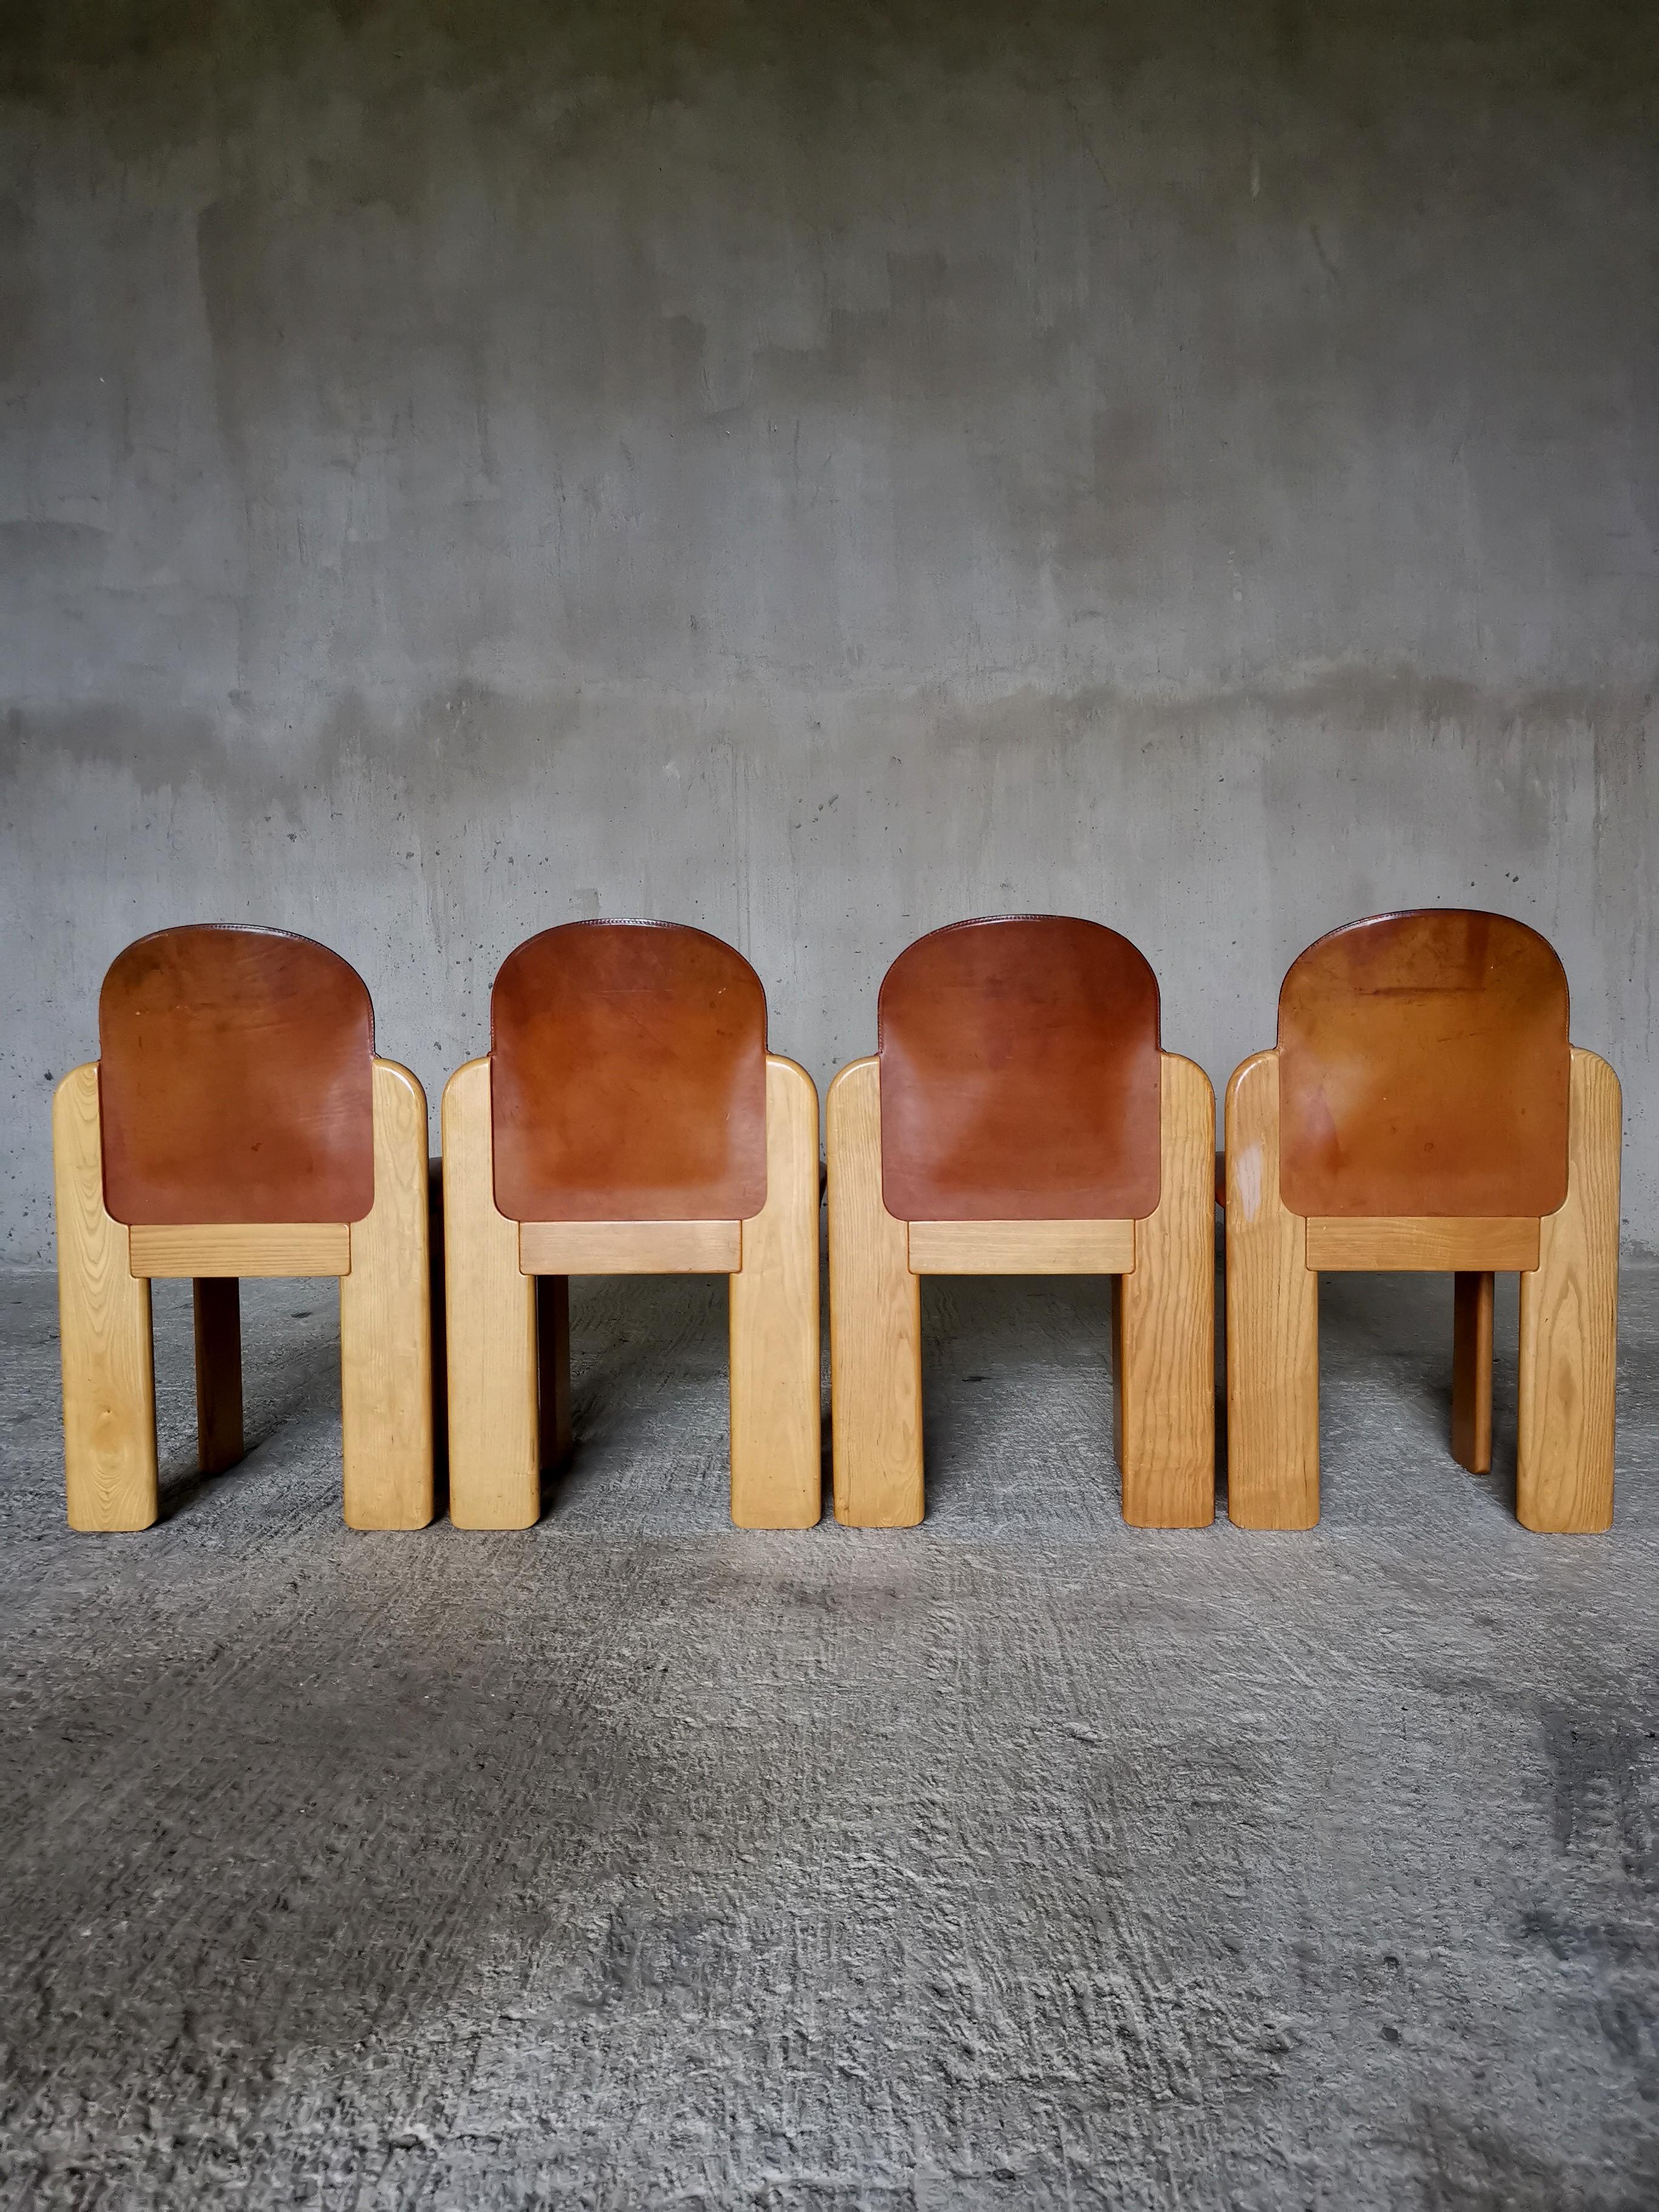 This set of 4 dining chairs in ash wood and rich cognac leather designed by Italian Silvio Coppola for Fratelli Montina in the 1970s is not a set easily found.
Let alone in this condition and with such harmonious and matching cognac patina on the